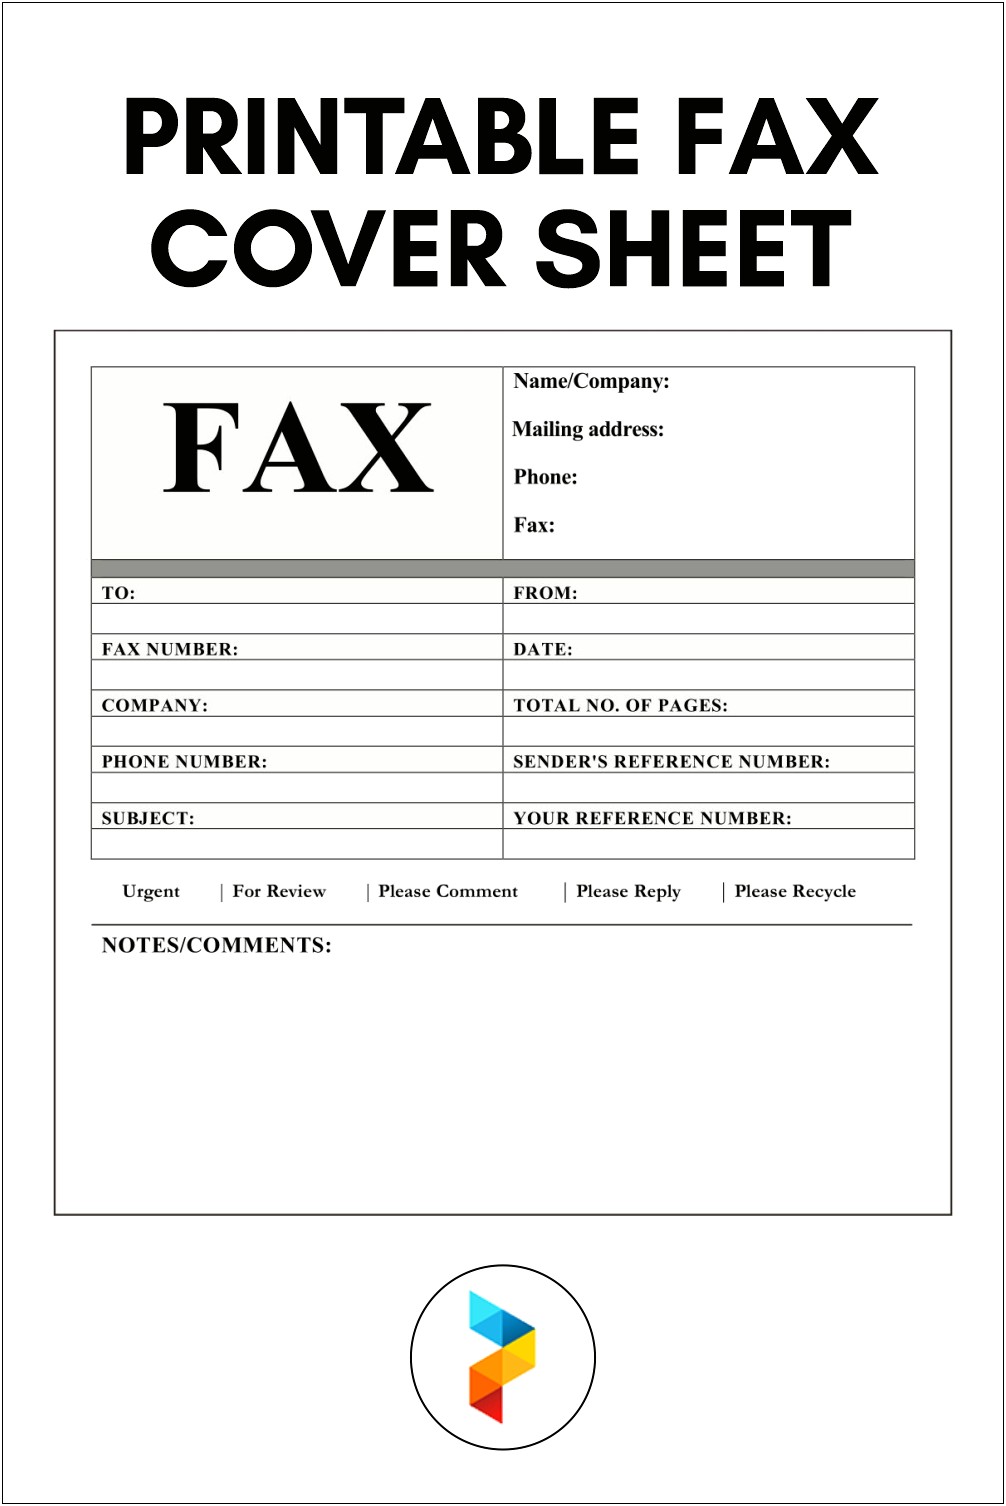 Fax Cover Sheet Template Free Printable Pdf